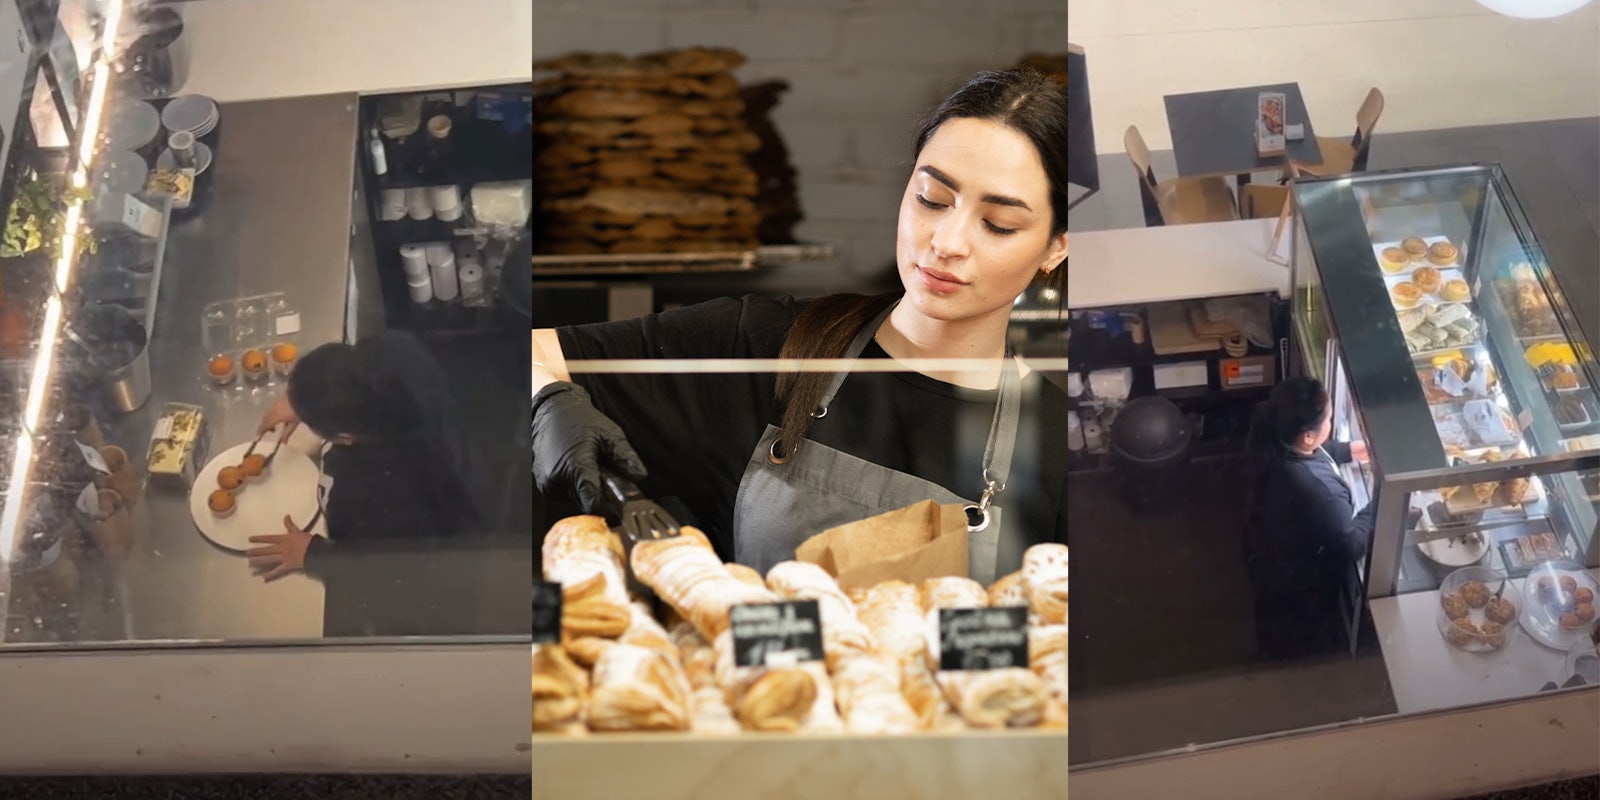 Customer catches cafe worker serving store bought pastries